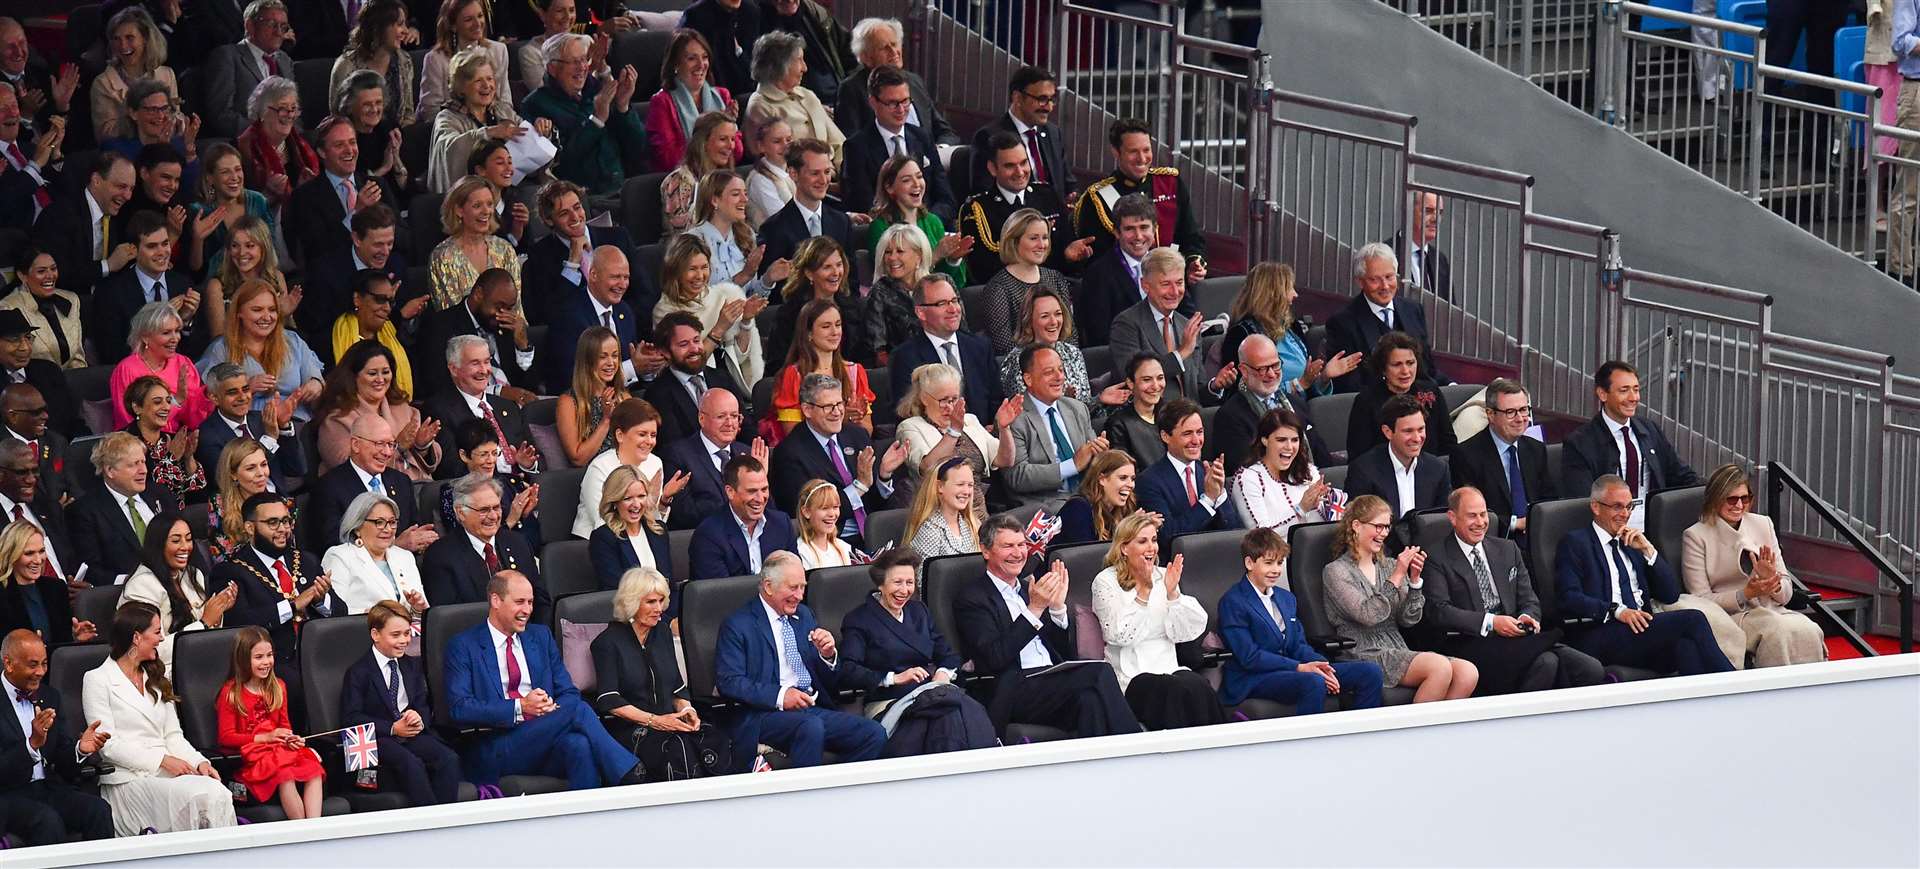 The scene in the packed royal box (Niklas Halle’n/PA)